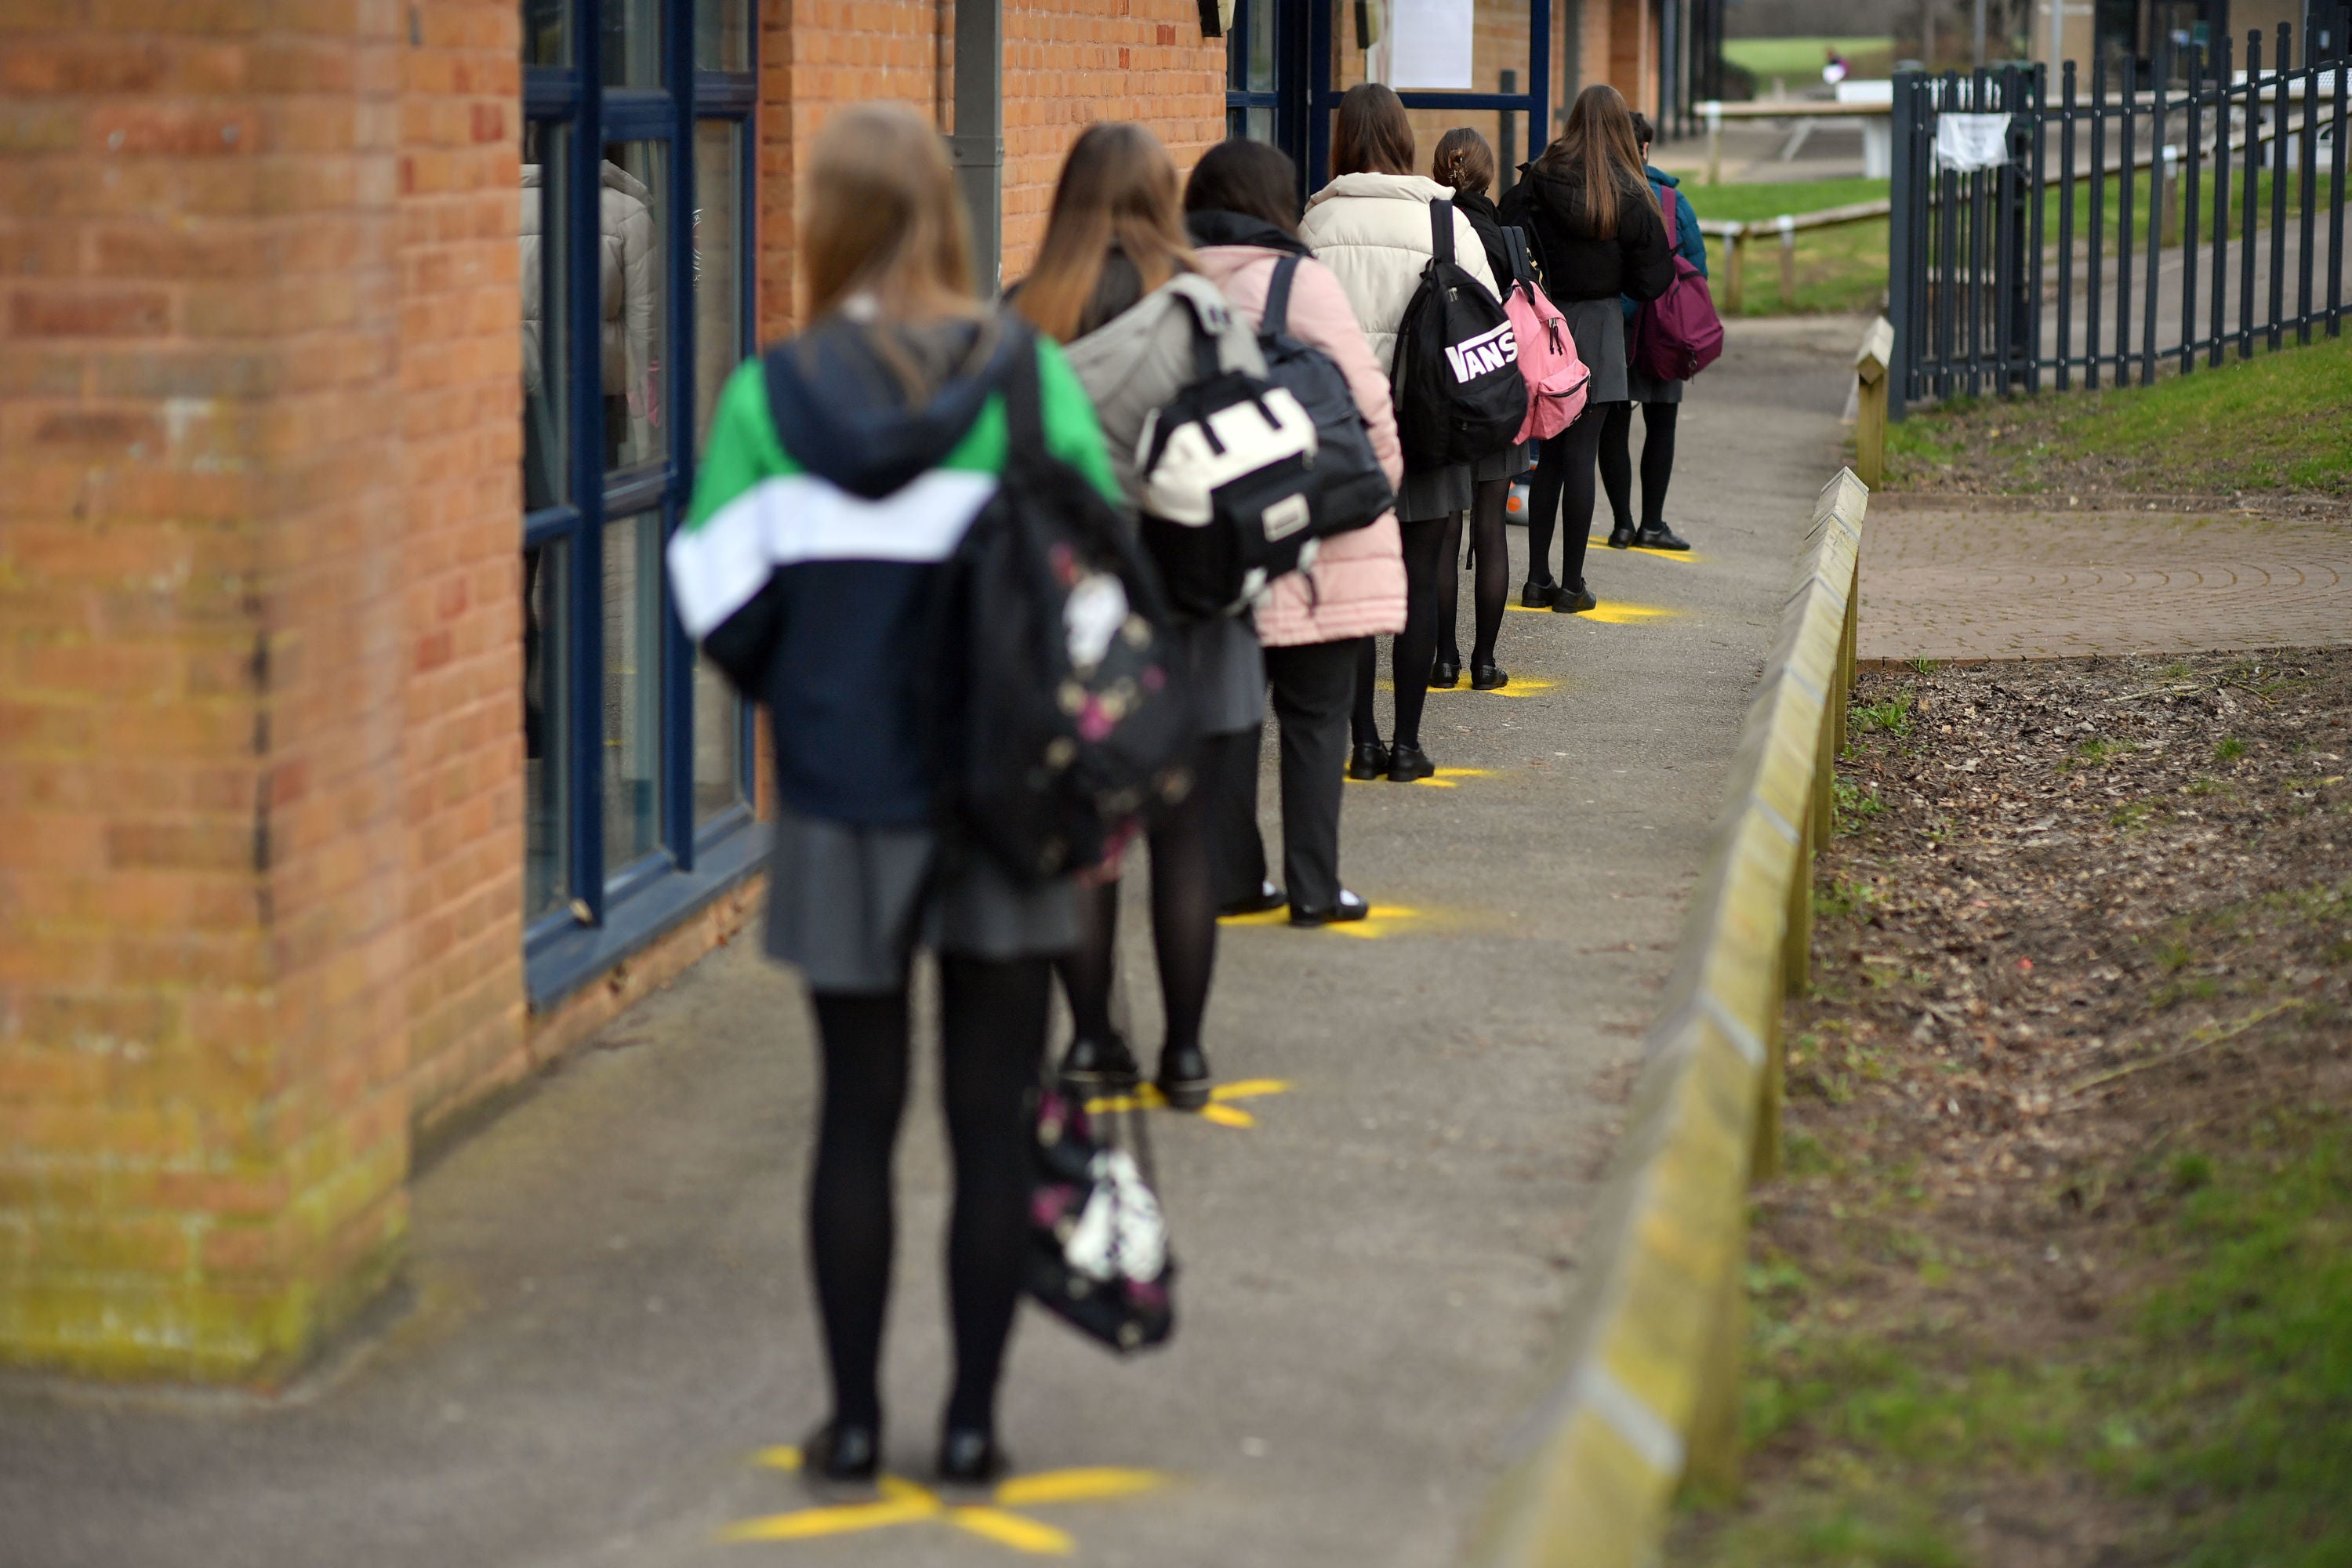 Pupils queuing to take a lateral flow test at Archway School in Stroud, Gloucestershire, in March this year